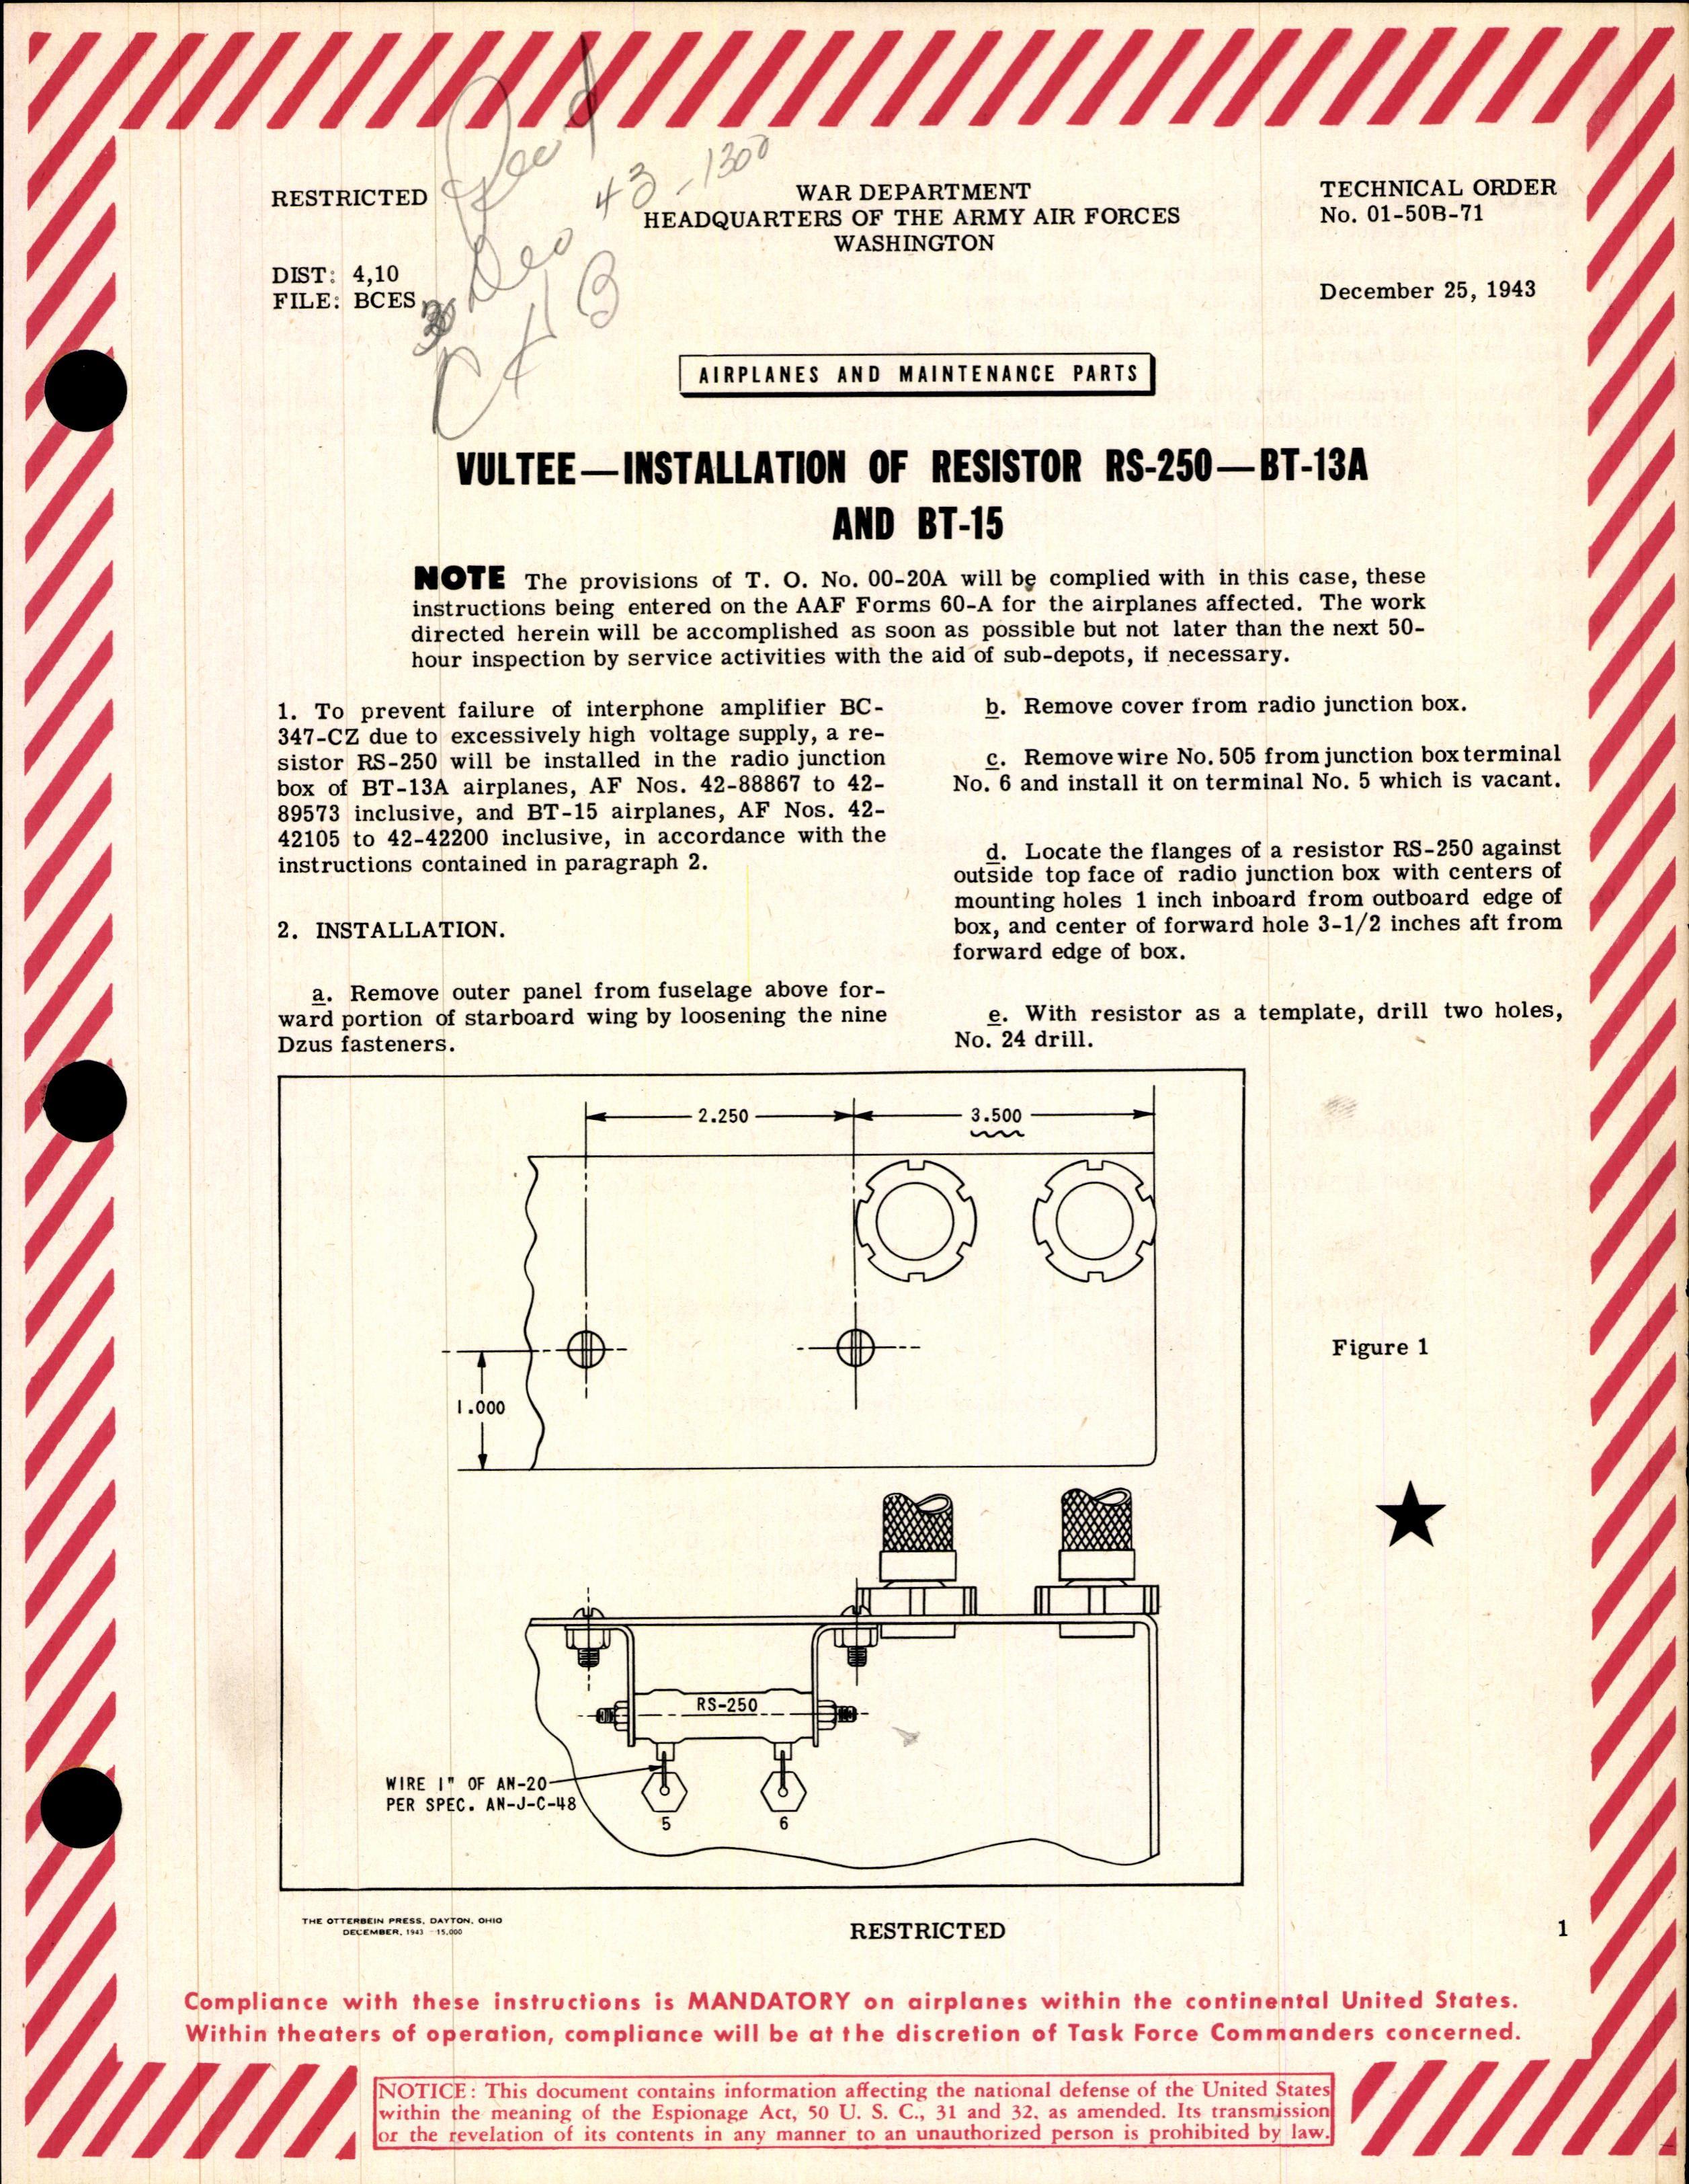 Sample page 1 from AirCorps Library document: Installation of Resistor RS-250 - BT-13A and BT-15